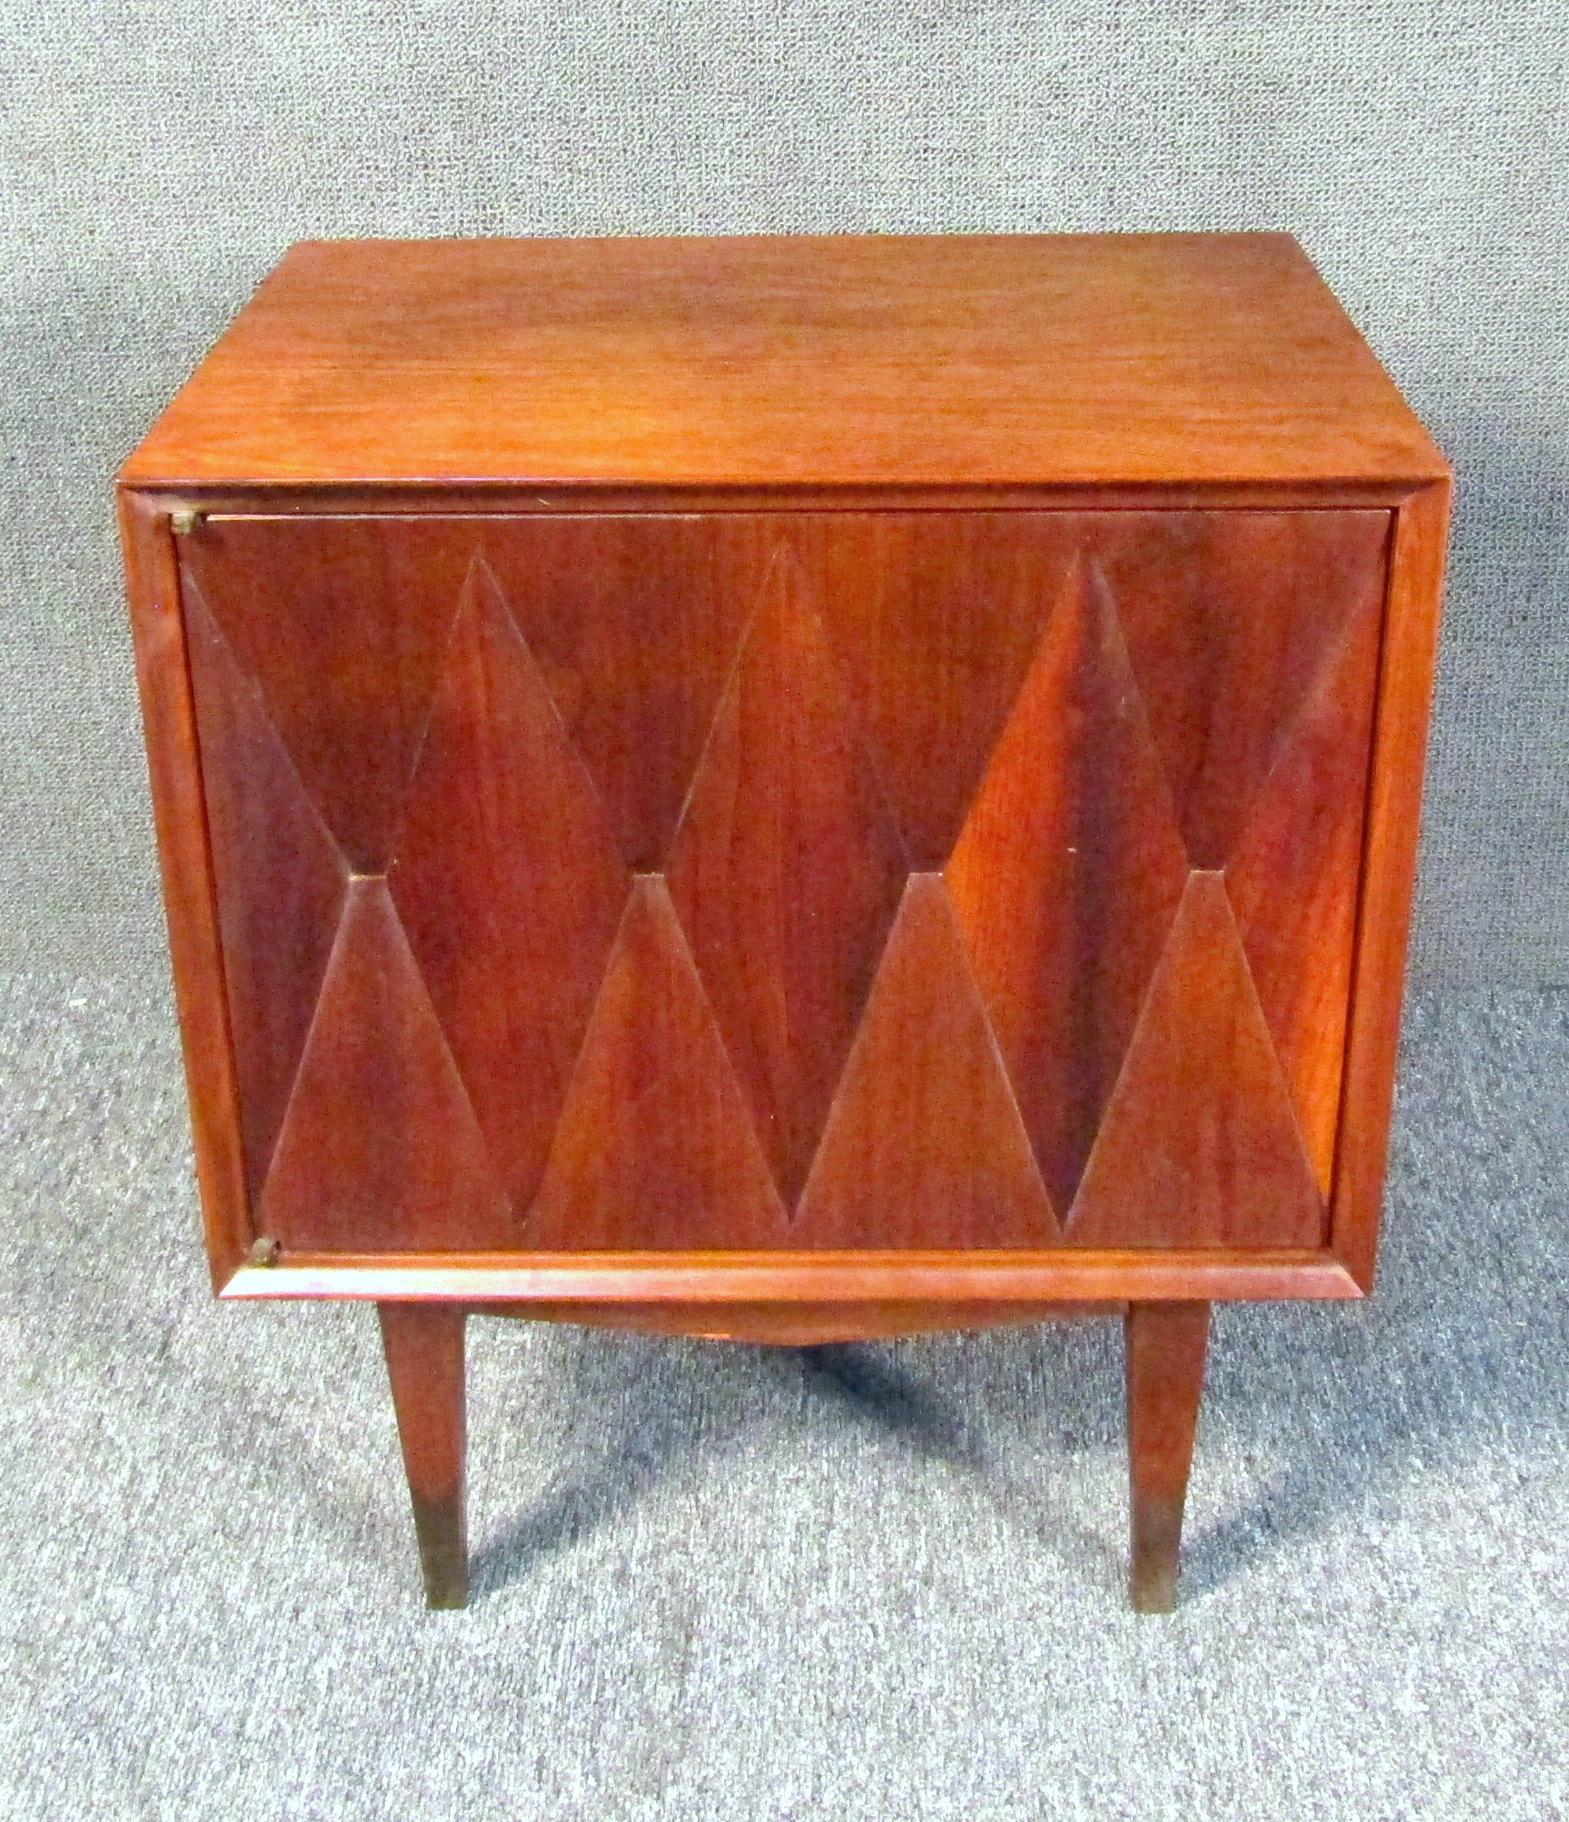 This vintage modern sculpted front nightstand features a diamond front cabinet door concealing shelved storage space. This unique Mid-Century storage table makes a great living room end table or bedside nightstand. Please confirm item location (NY